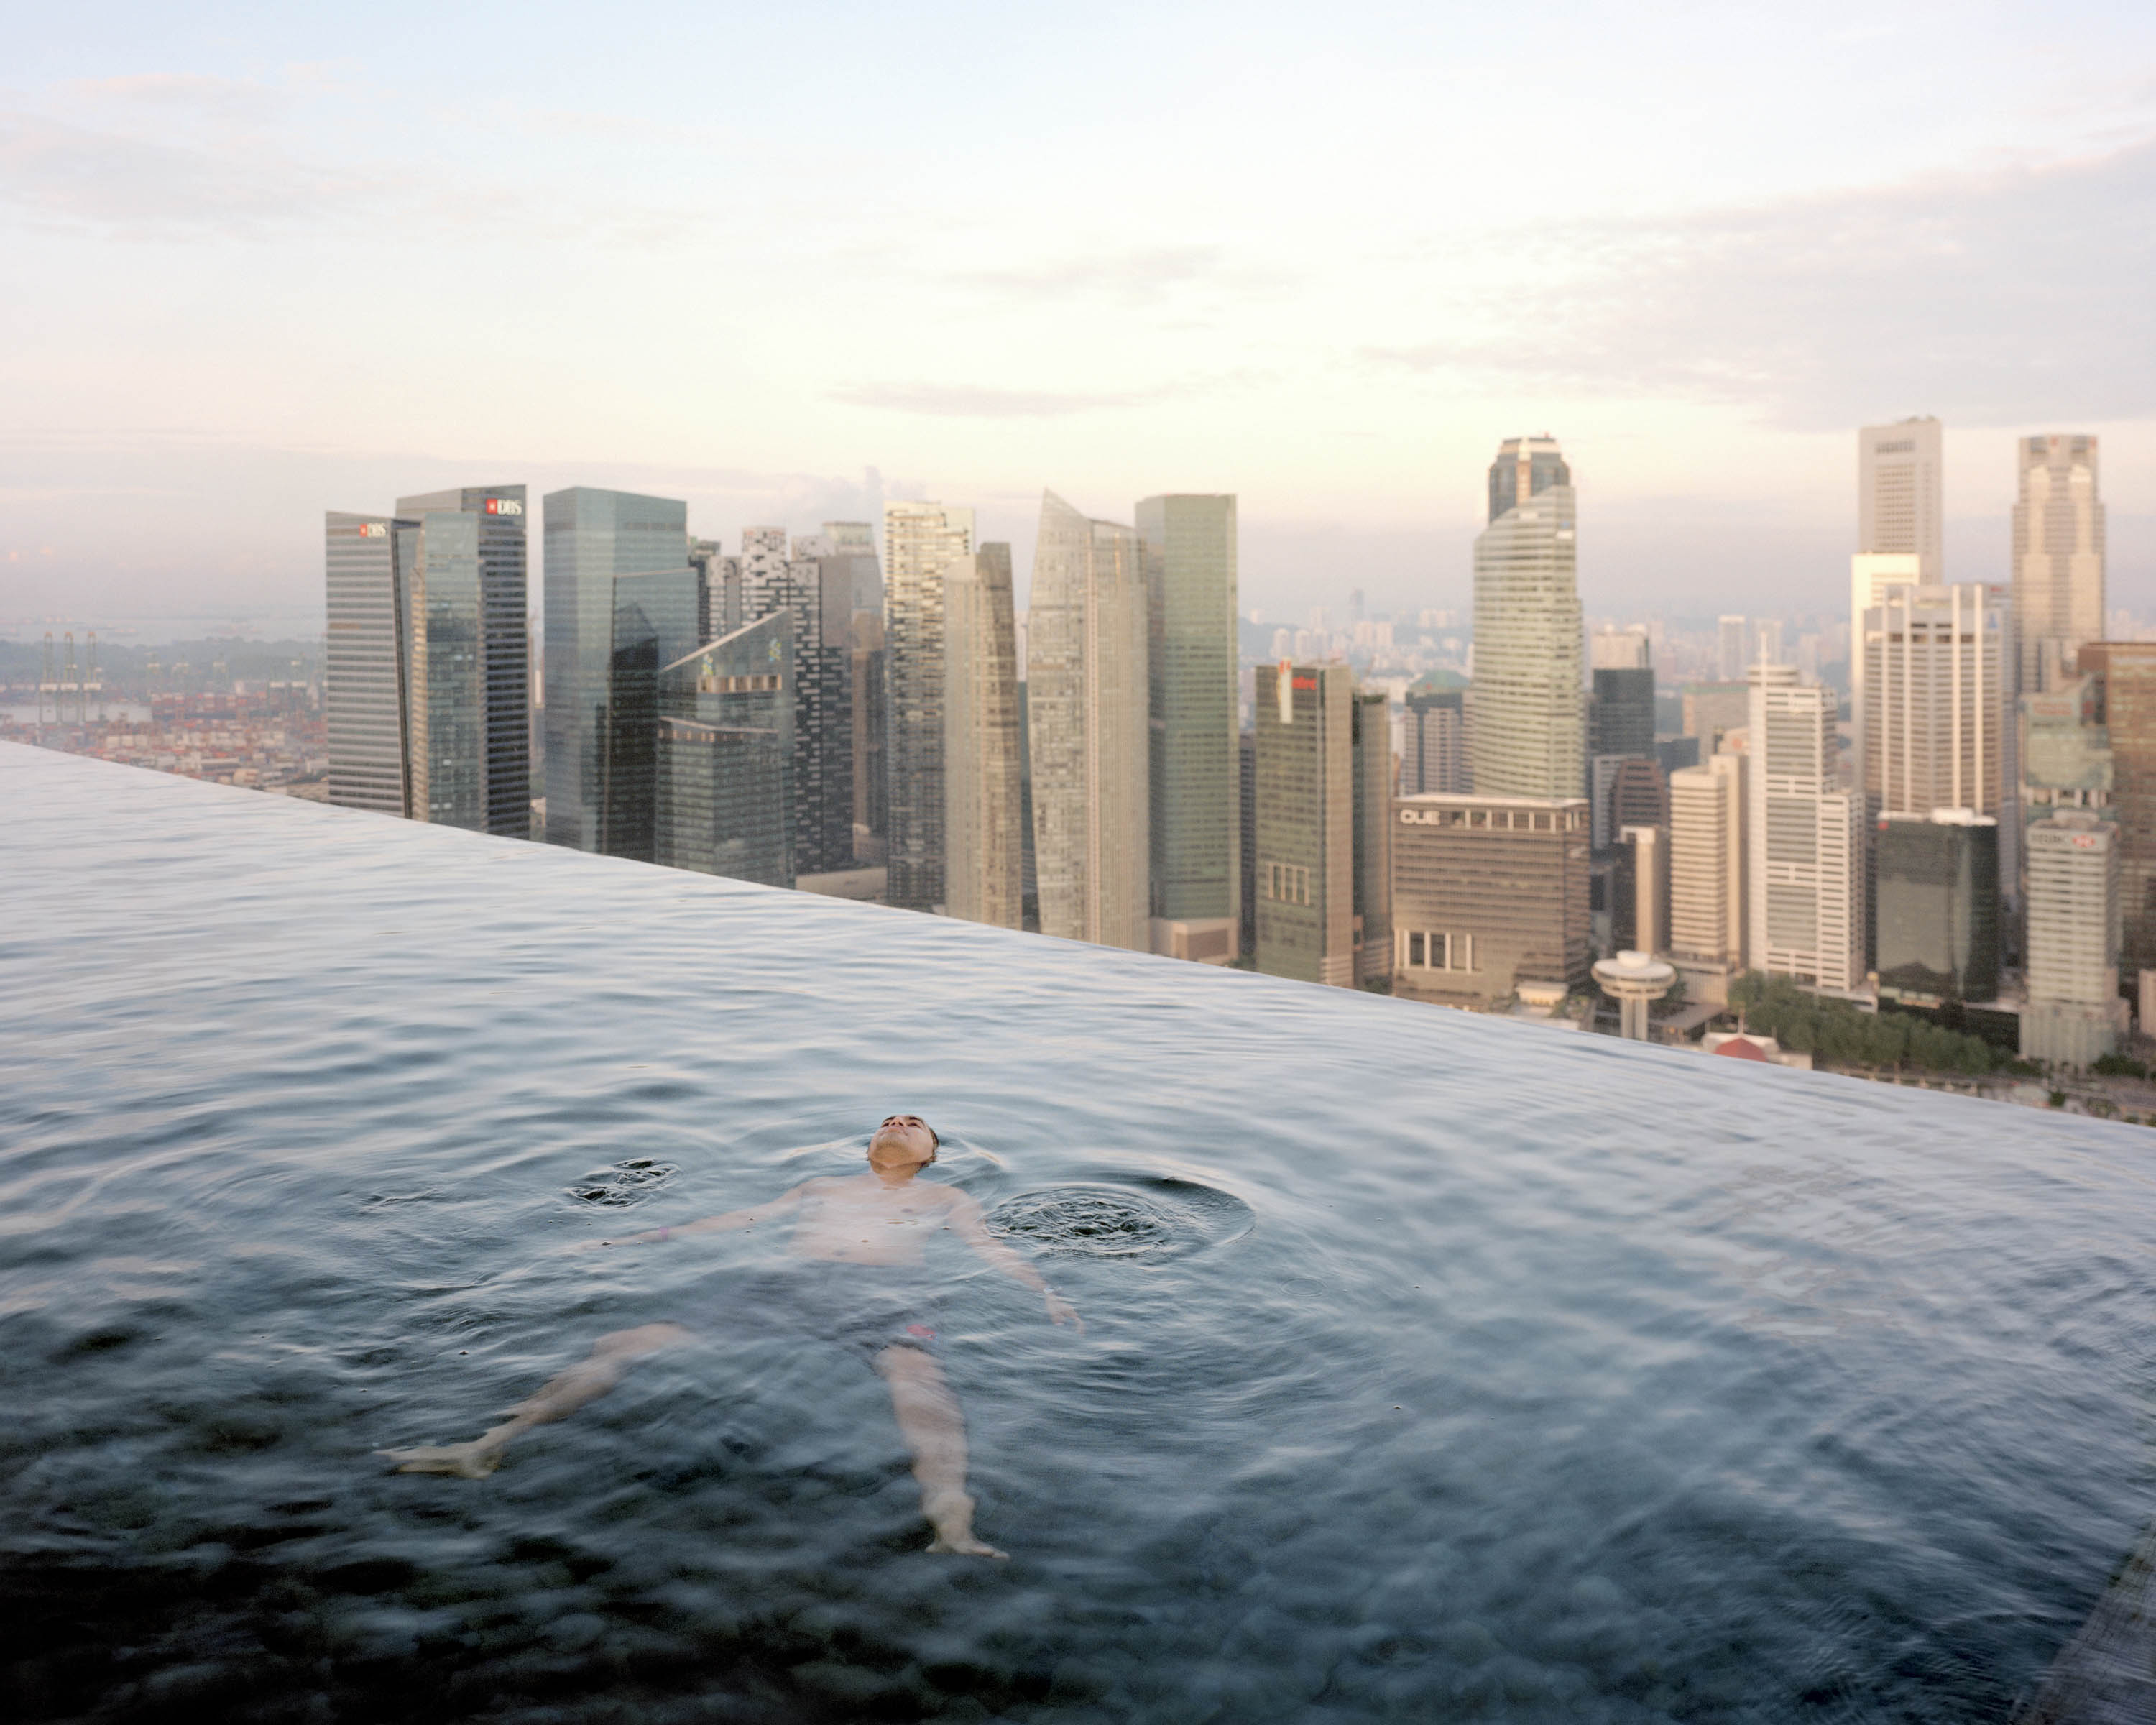 A man floats in the infinity pool on the 57th floor of the Marina Bay Sands Hotel, overlooking Singapore’s financial district. (Paolo Woods &amp; Gabriele Galimberti—Institute)